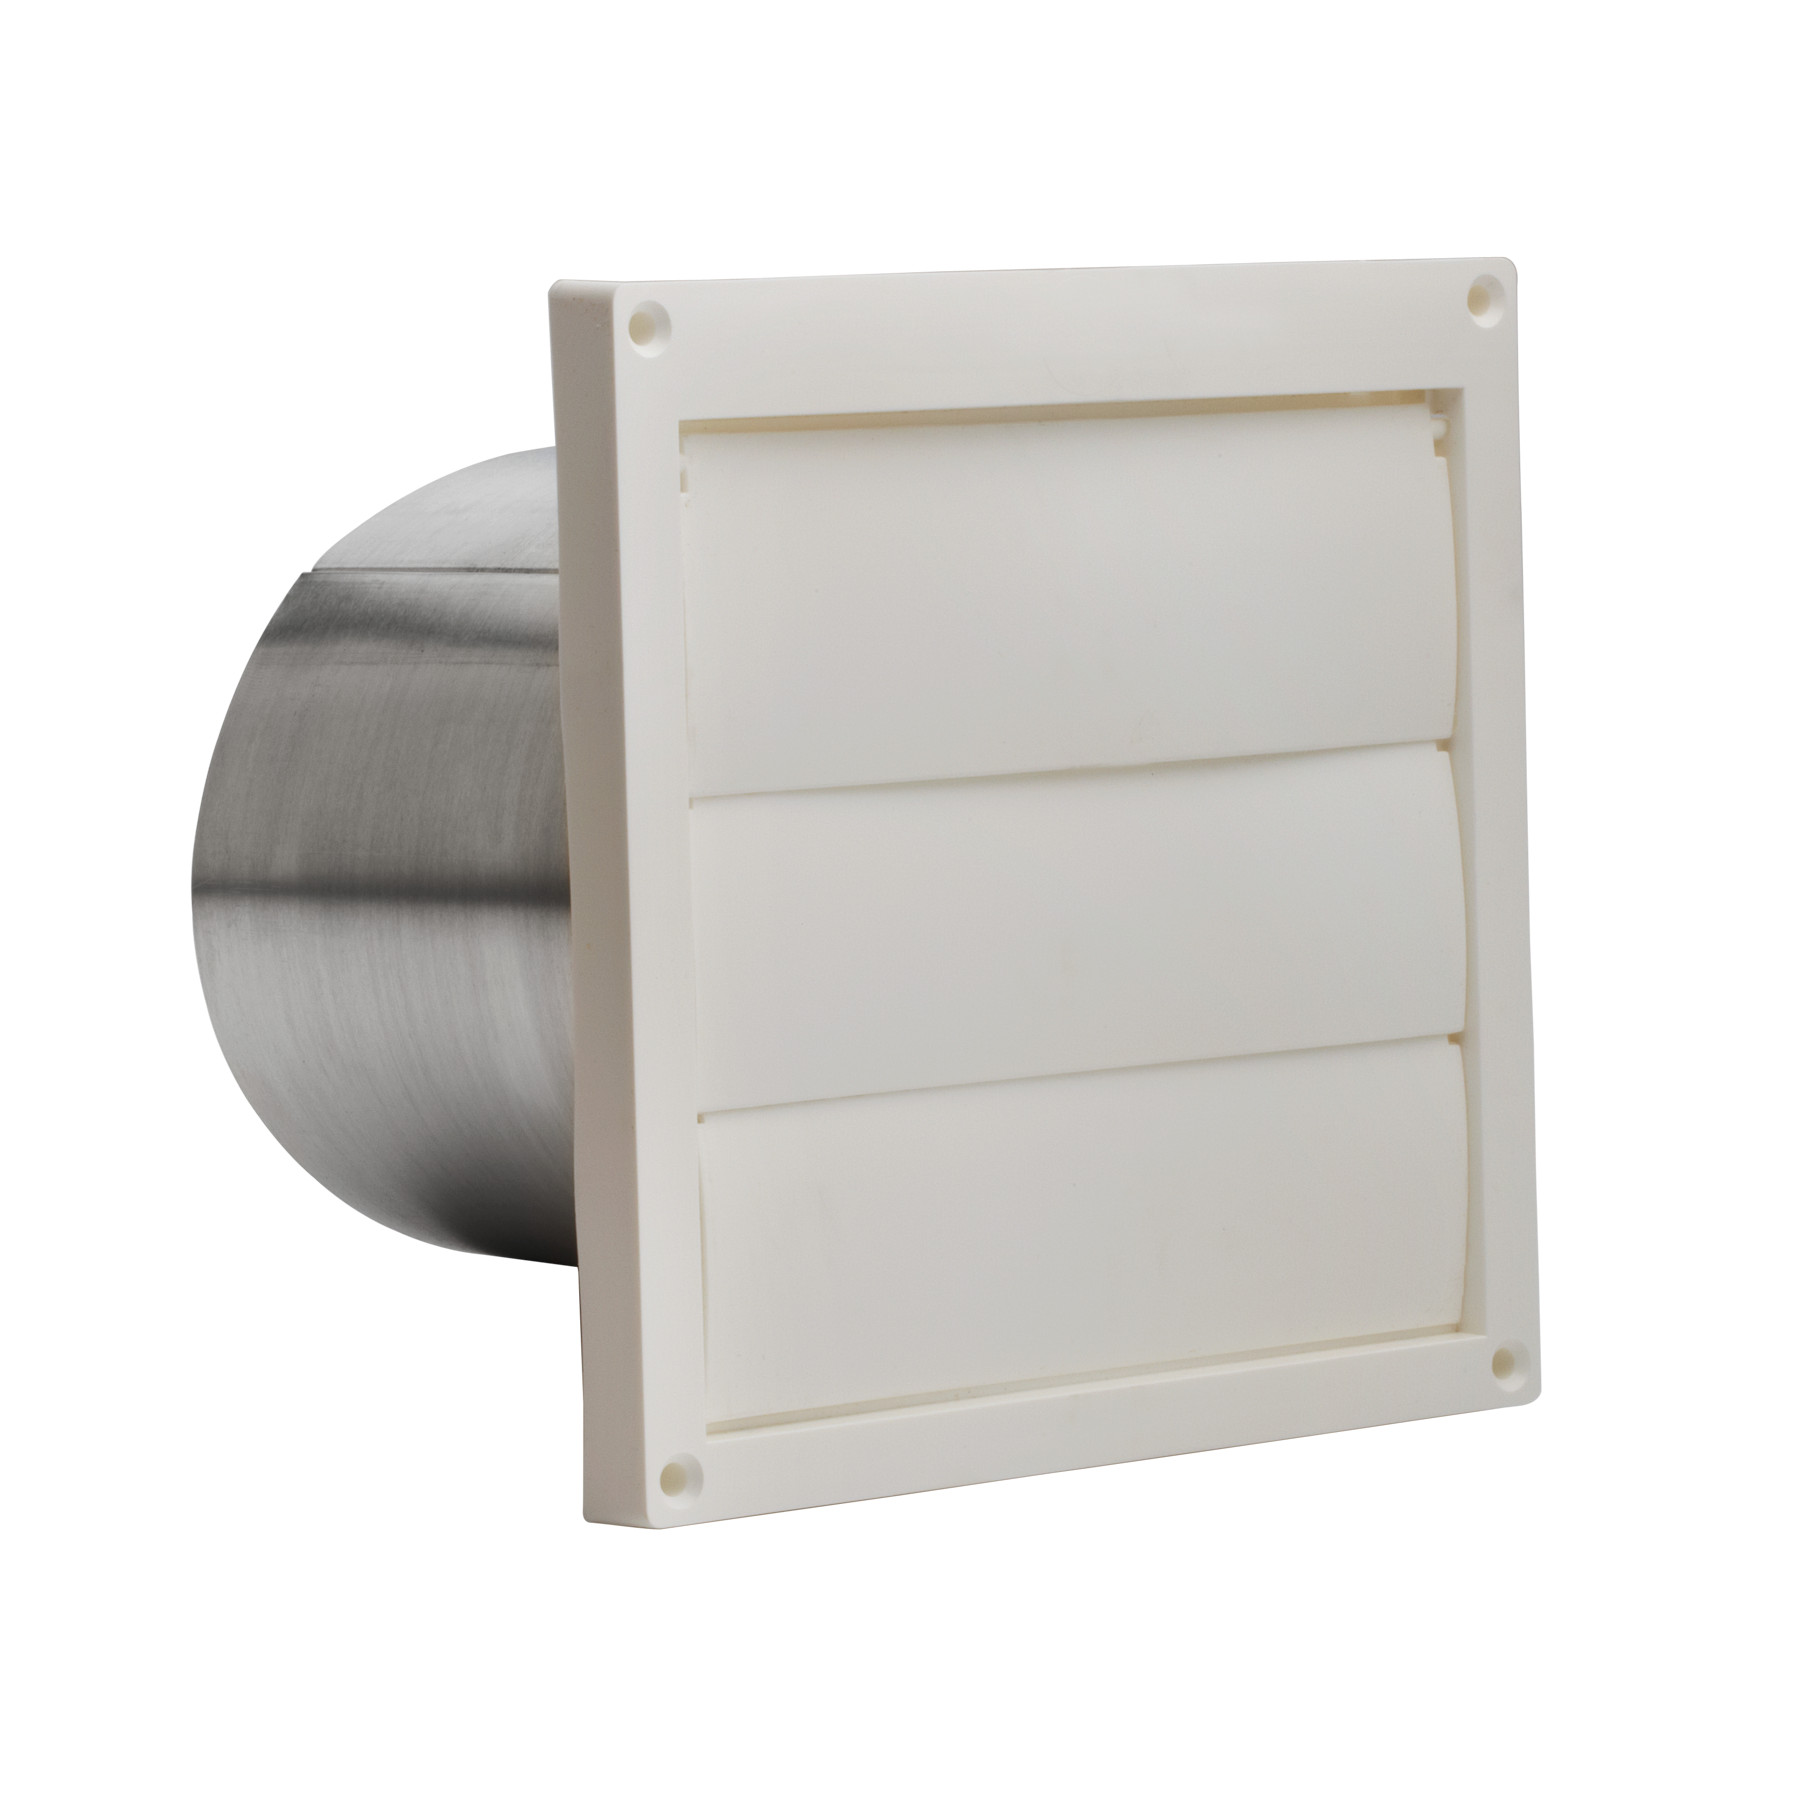 **DISCONTINUED** Broan-NuTone® Wall Cap, White Plastic Louvered, 6-Inch Round Duct